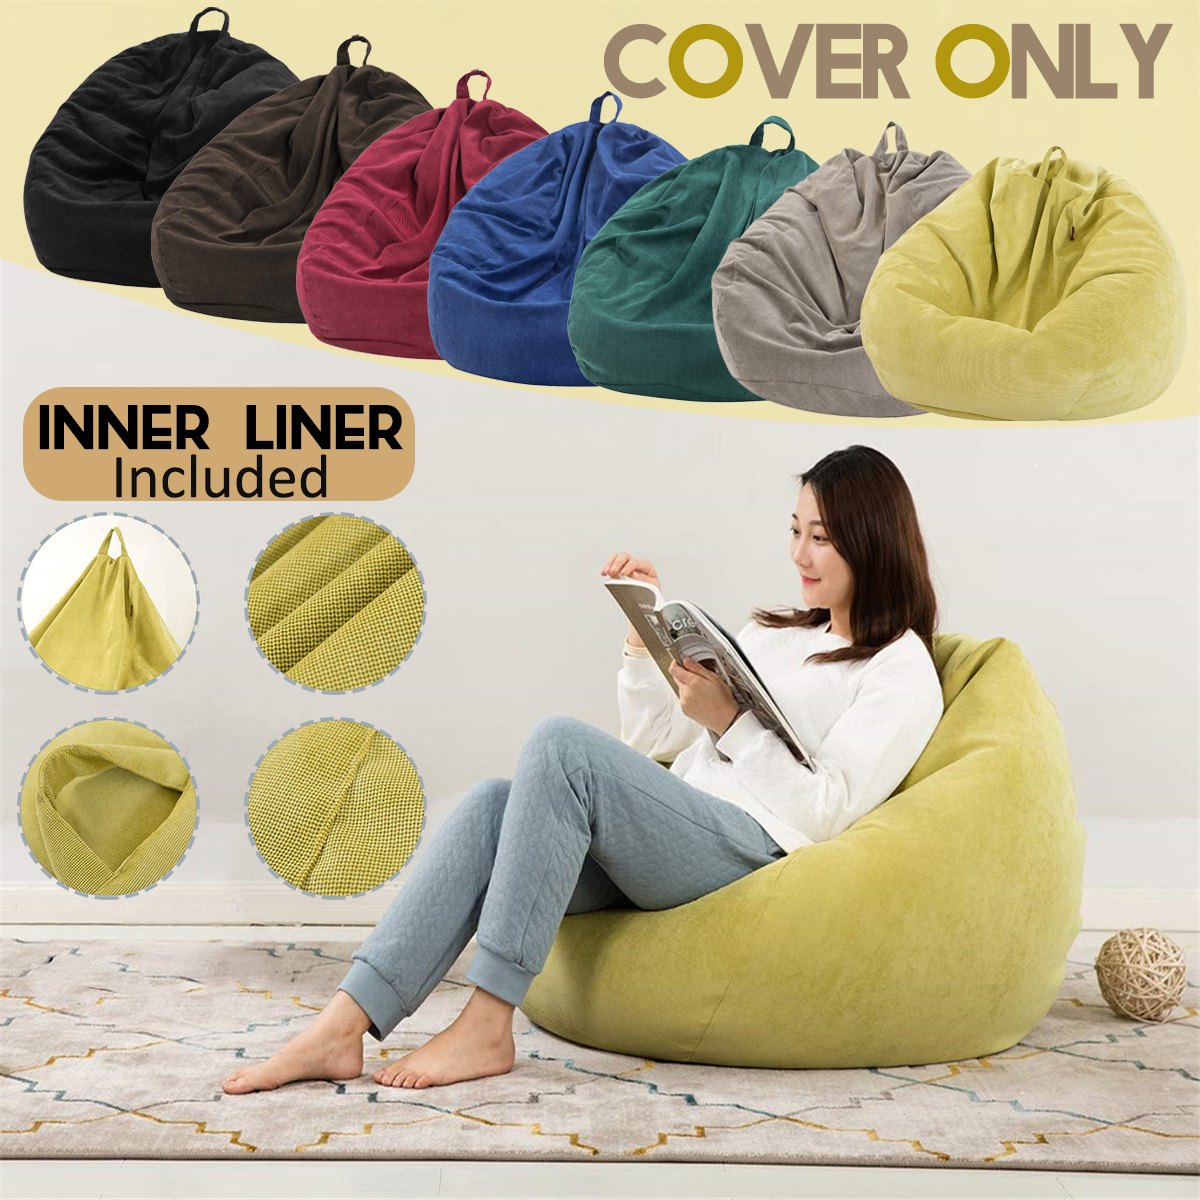 Corduroy Bean Bag Chair 70*80cm Multicolor Gaming Sofa Cover Indoor Lazy Sofa With Mesh Bag Liner Cover 8